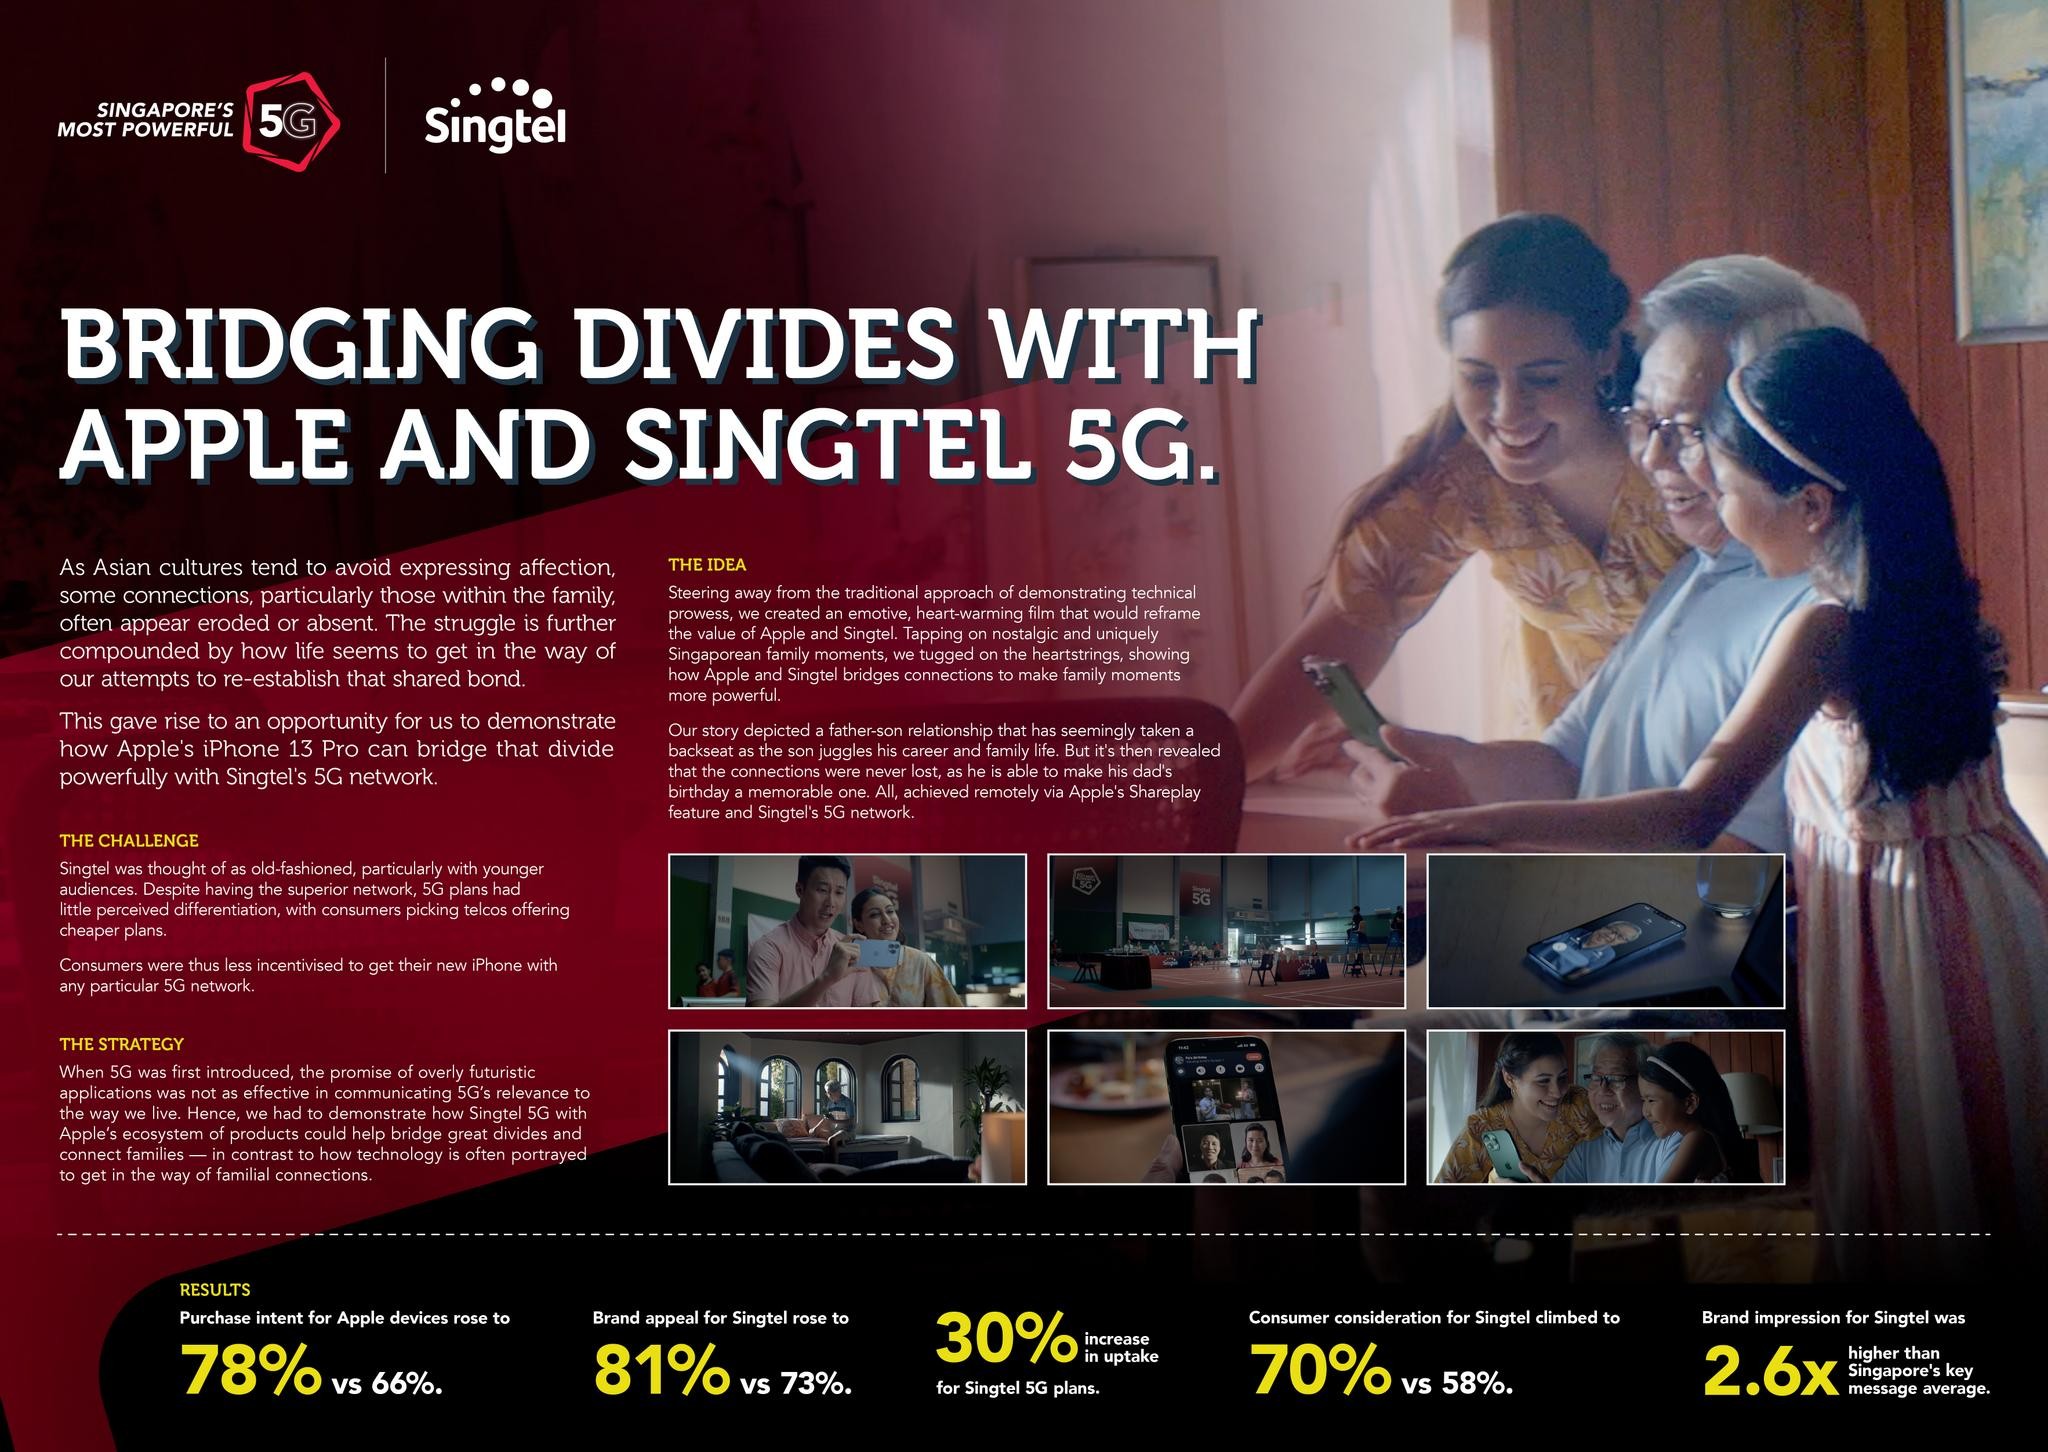 Family moments made powerful with Singtel 5G and iPhone 13 Pro